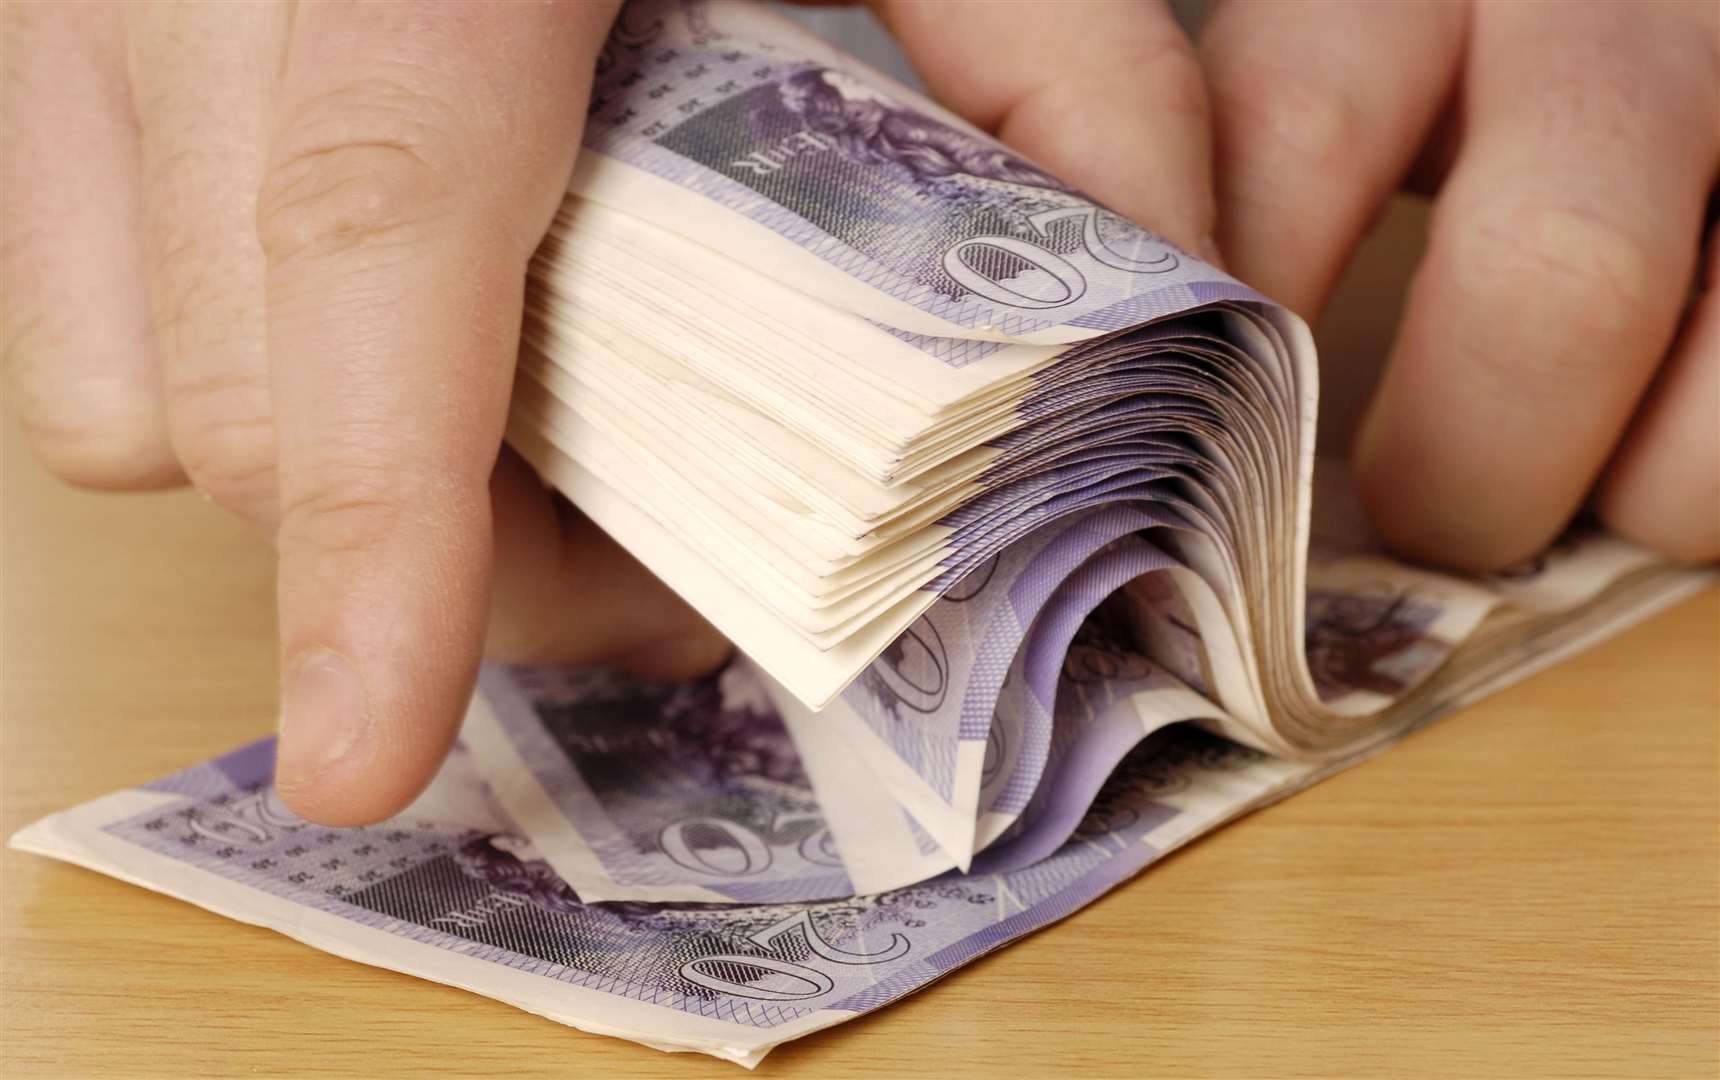 More than £350,000 was laundered from 16 vulnerable victims. Picture: iStock